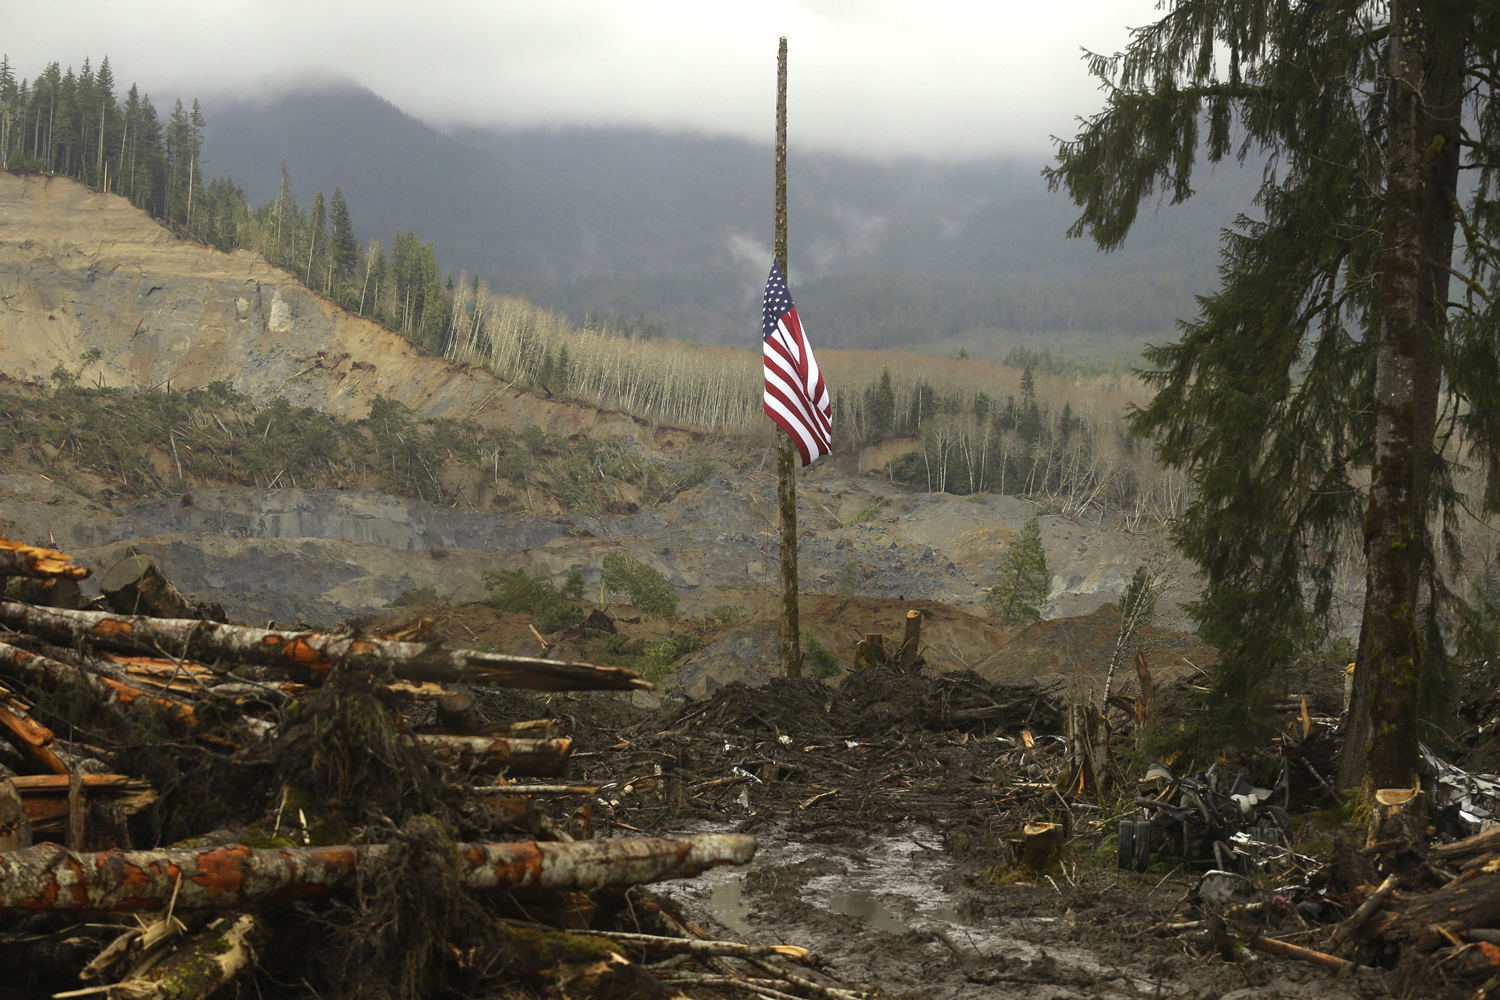 Mar. 30, 2014. A flag flies at half-staff on a log with the slope of the massive mudslide that struck Oso in the background near Darrington, Washington.